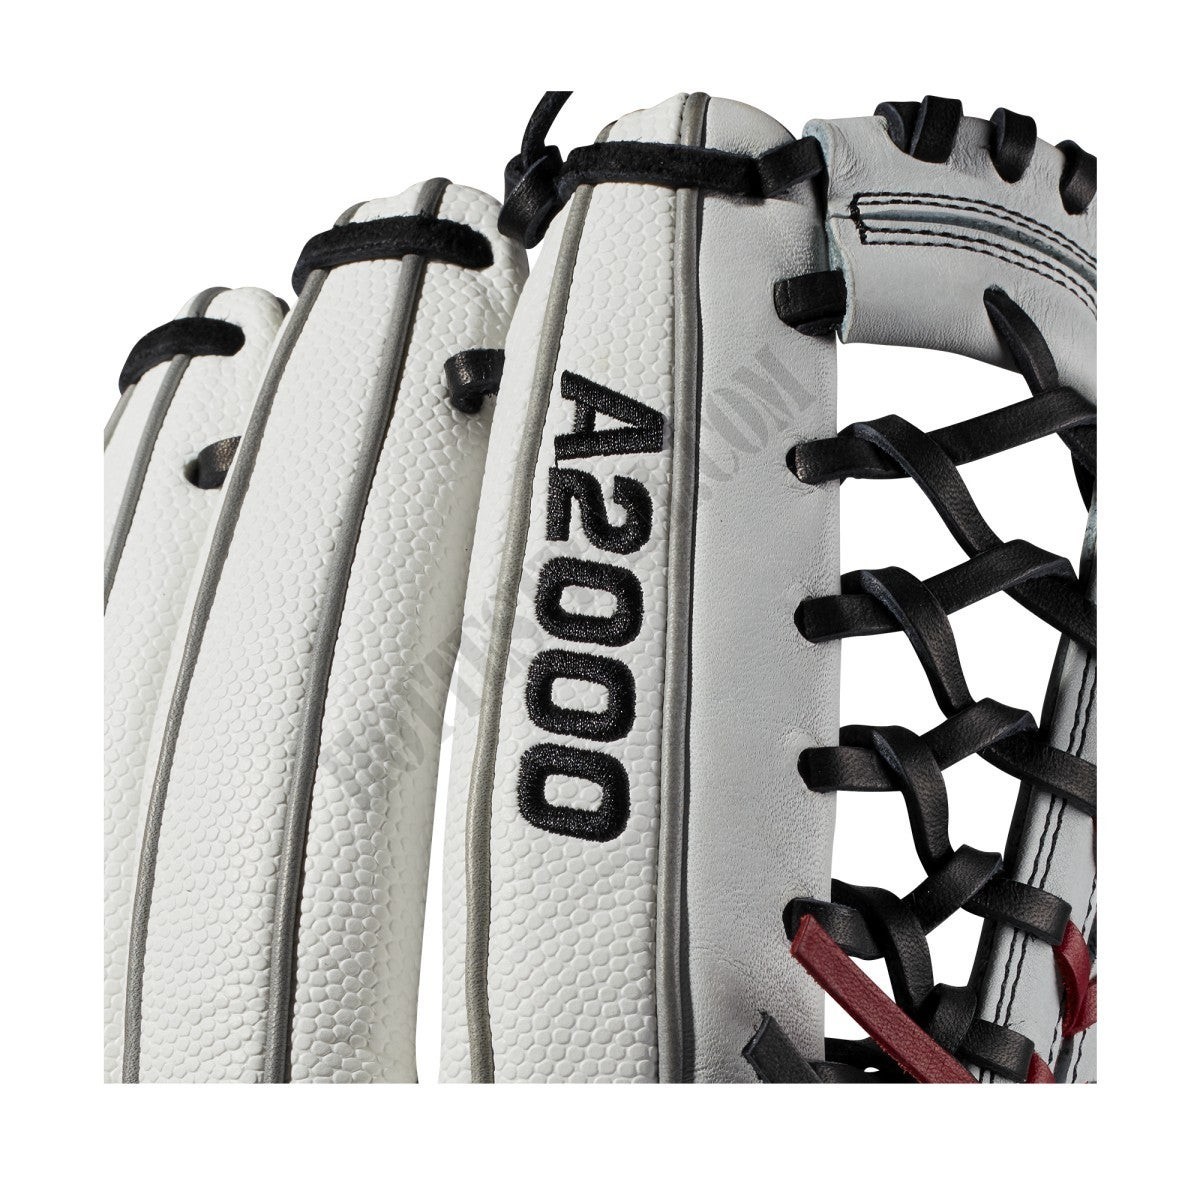 2019 A2000 T125 SuperSkin 12.5" Outfield Fastpitch Glove ● Wilson Promotions - -6